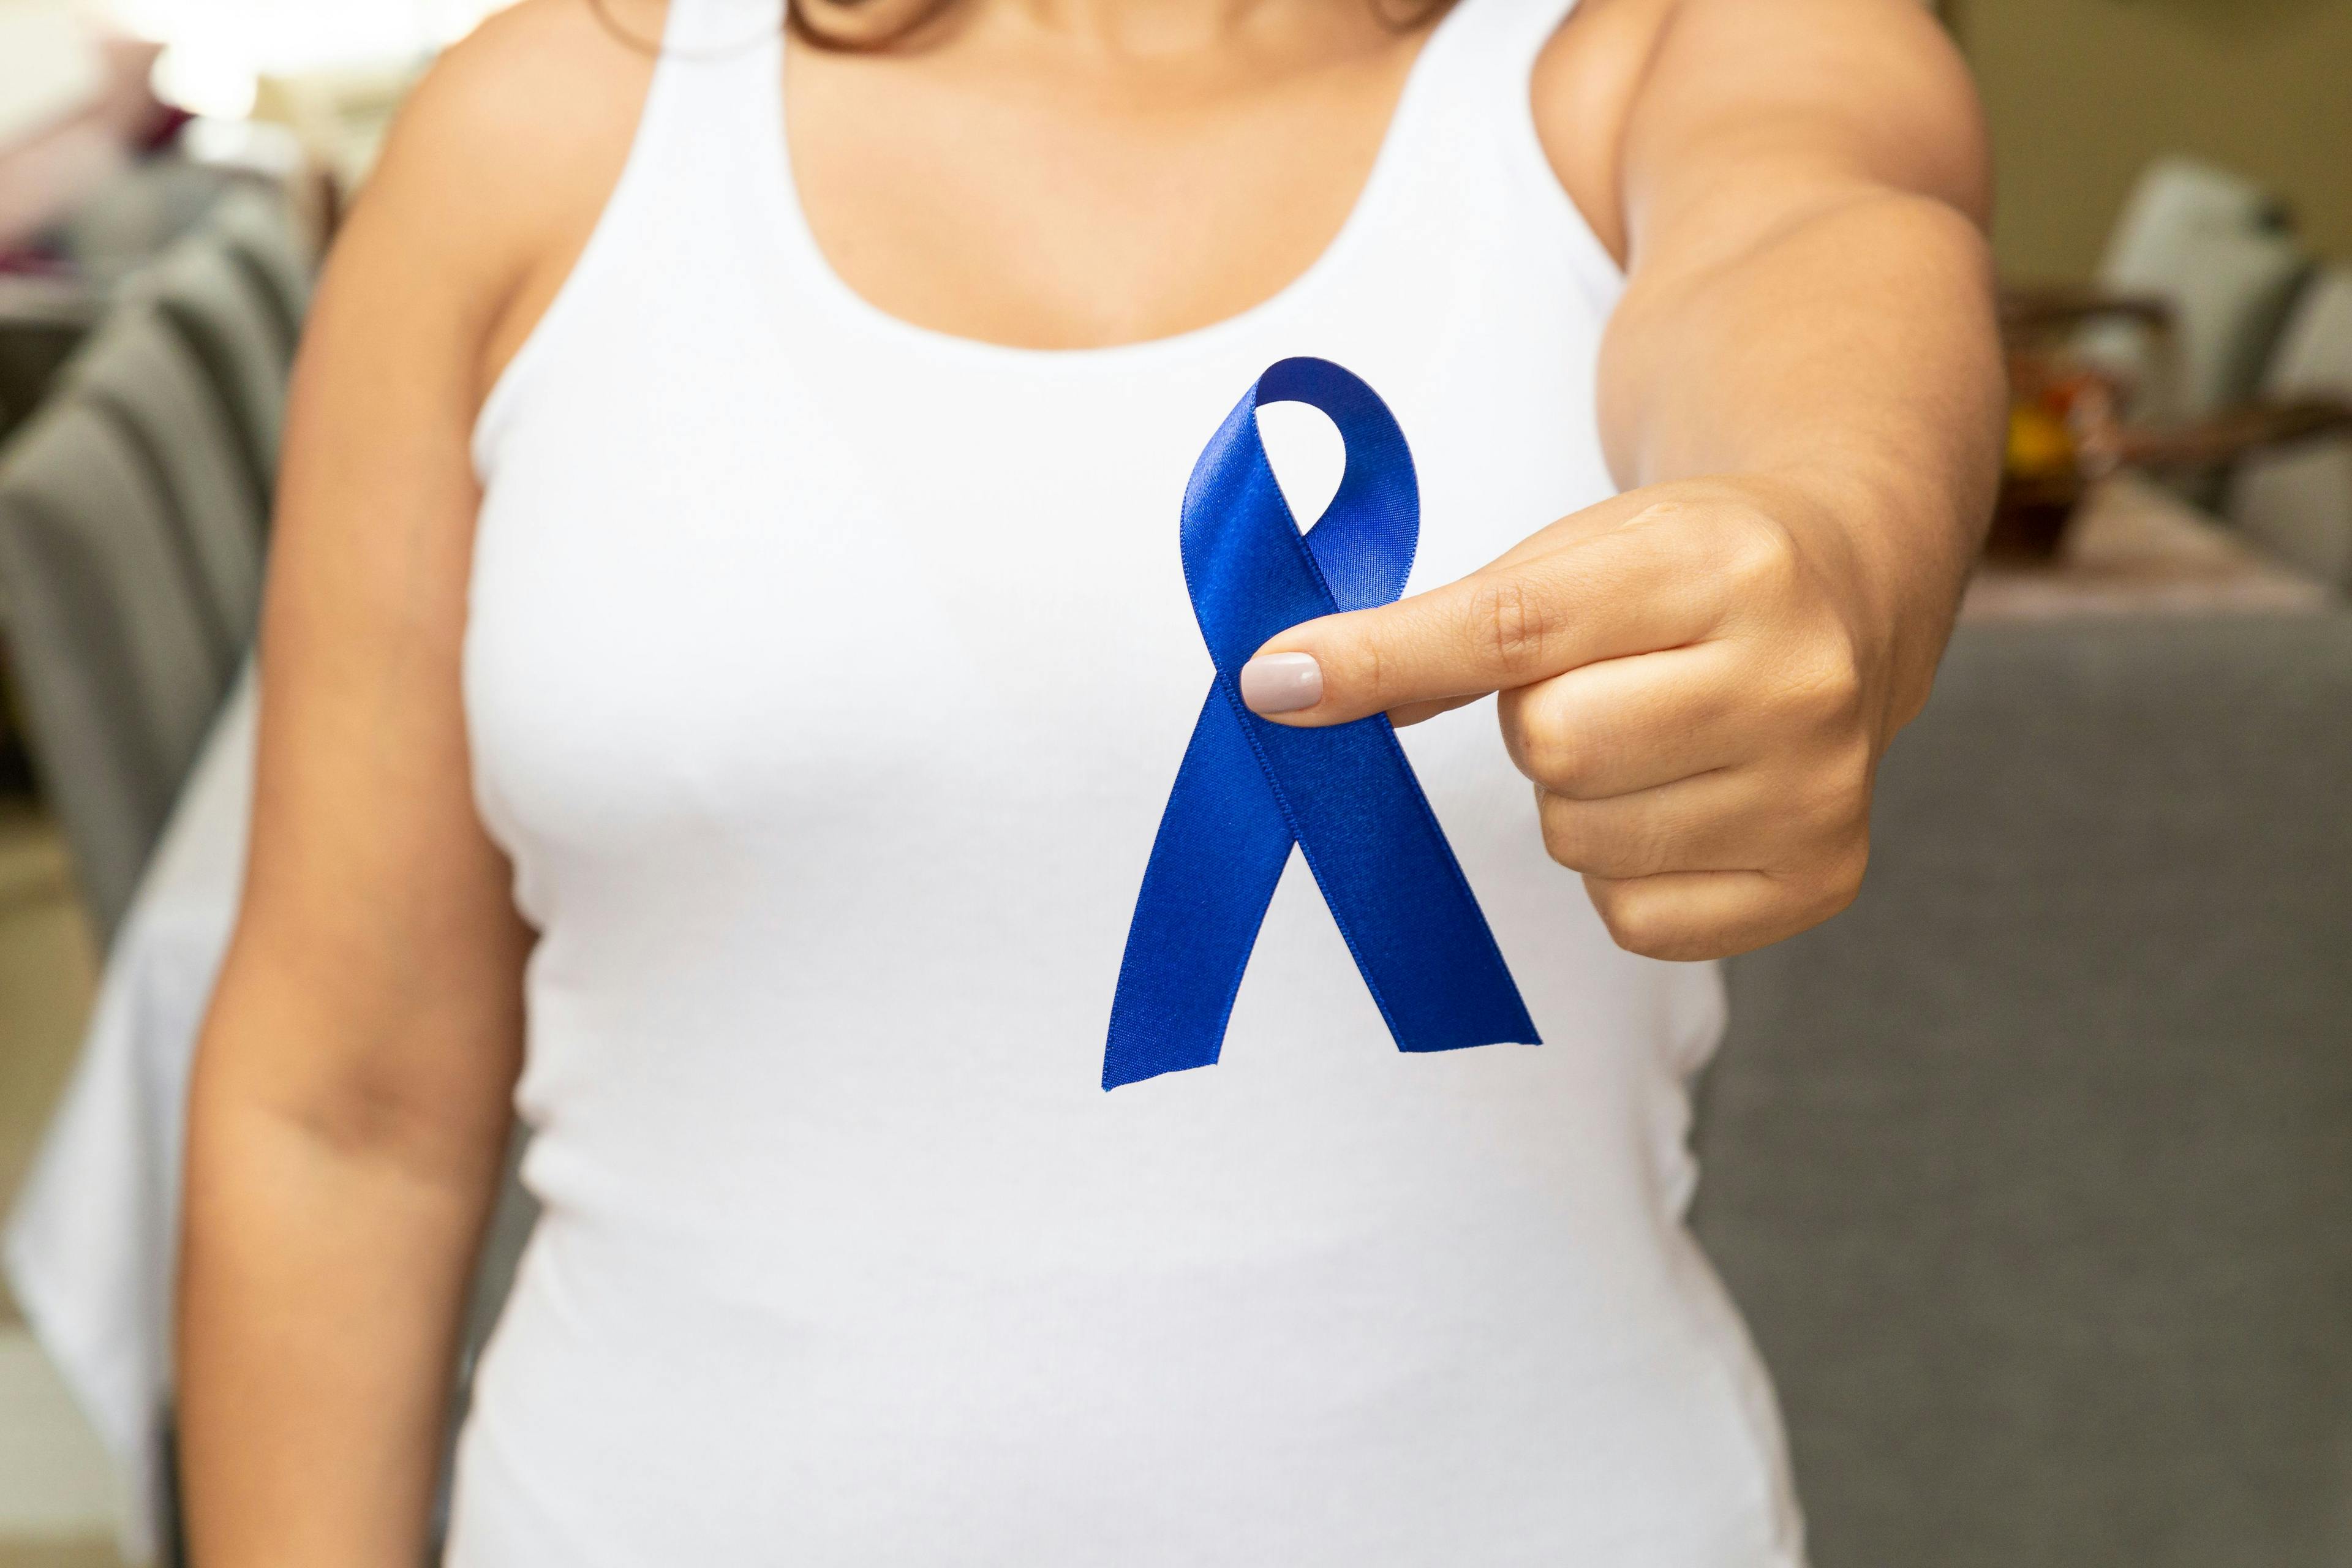 Young woman, with pink t-shirt, holding blue ribbon | Image credit: milenofrigatto - stock.adobe.com